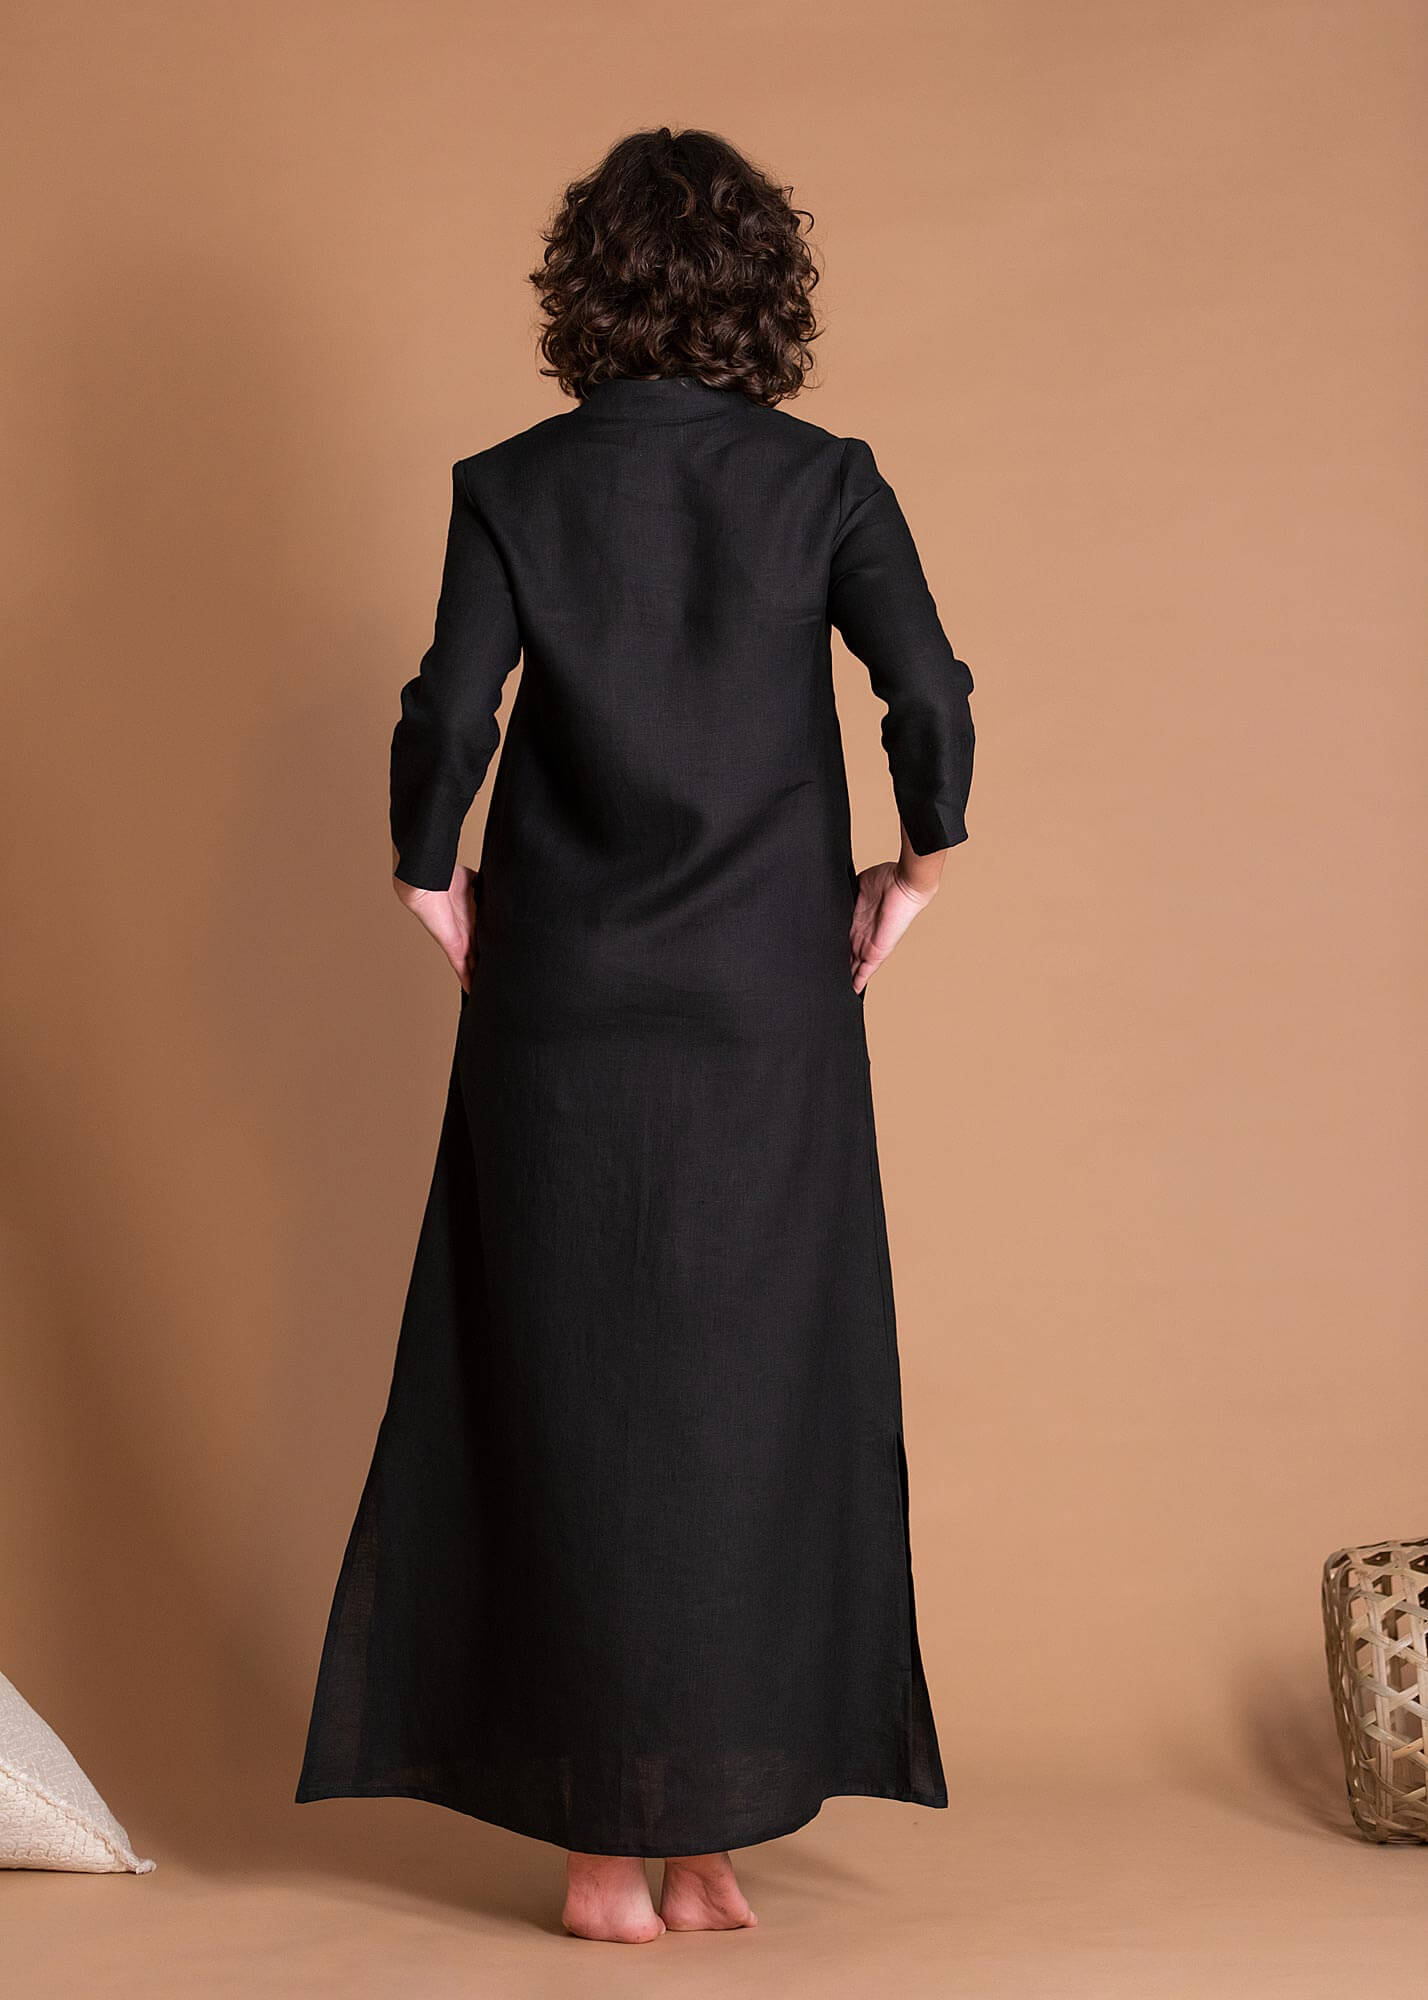 Black Flax Maxi Dress With Sleeves And Medium Side Slits